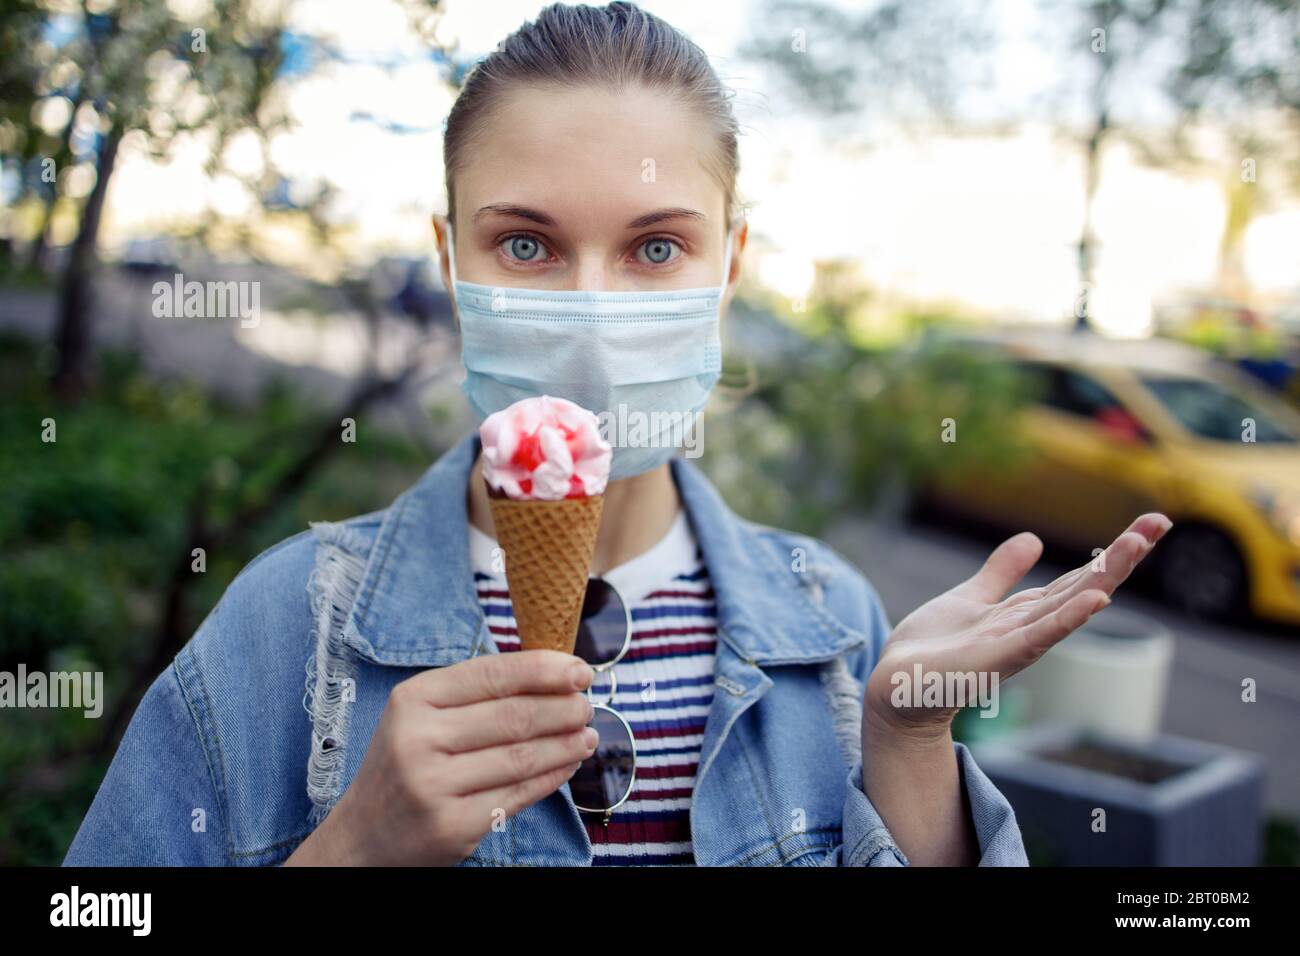 Woman in medical mask with ice cream in her hands on walk on street, close-up Stock Photo